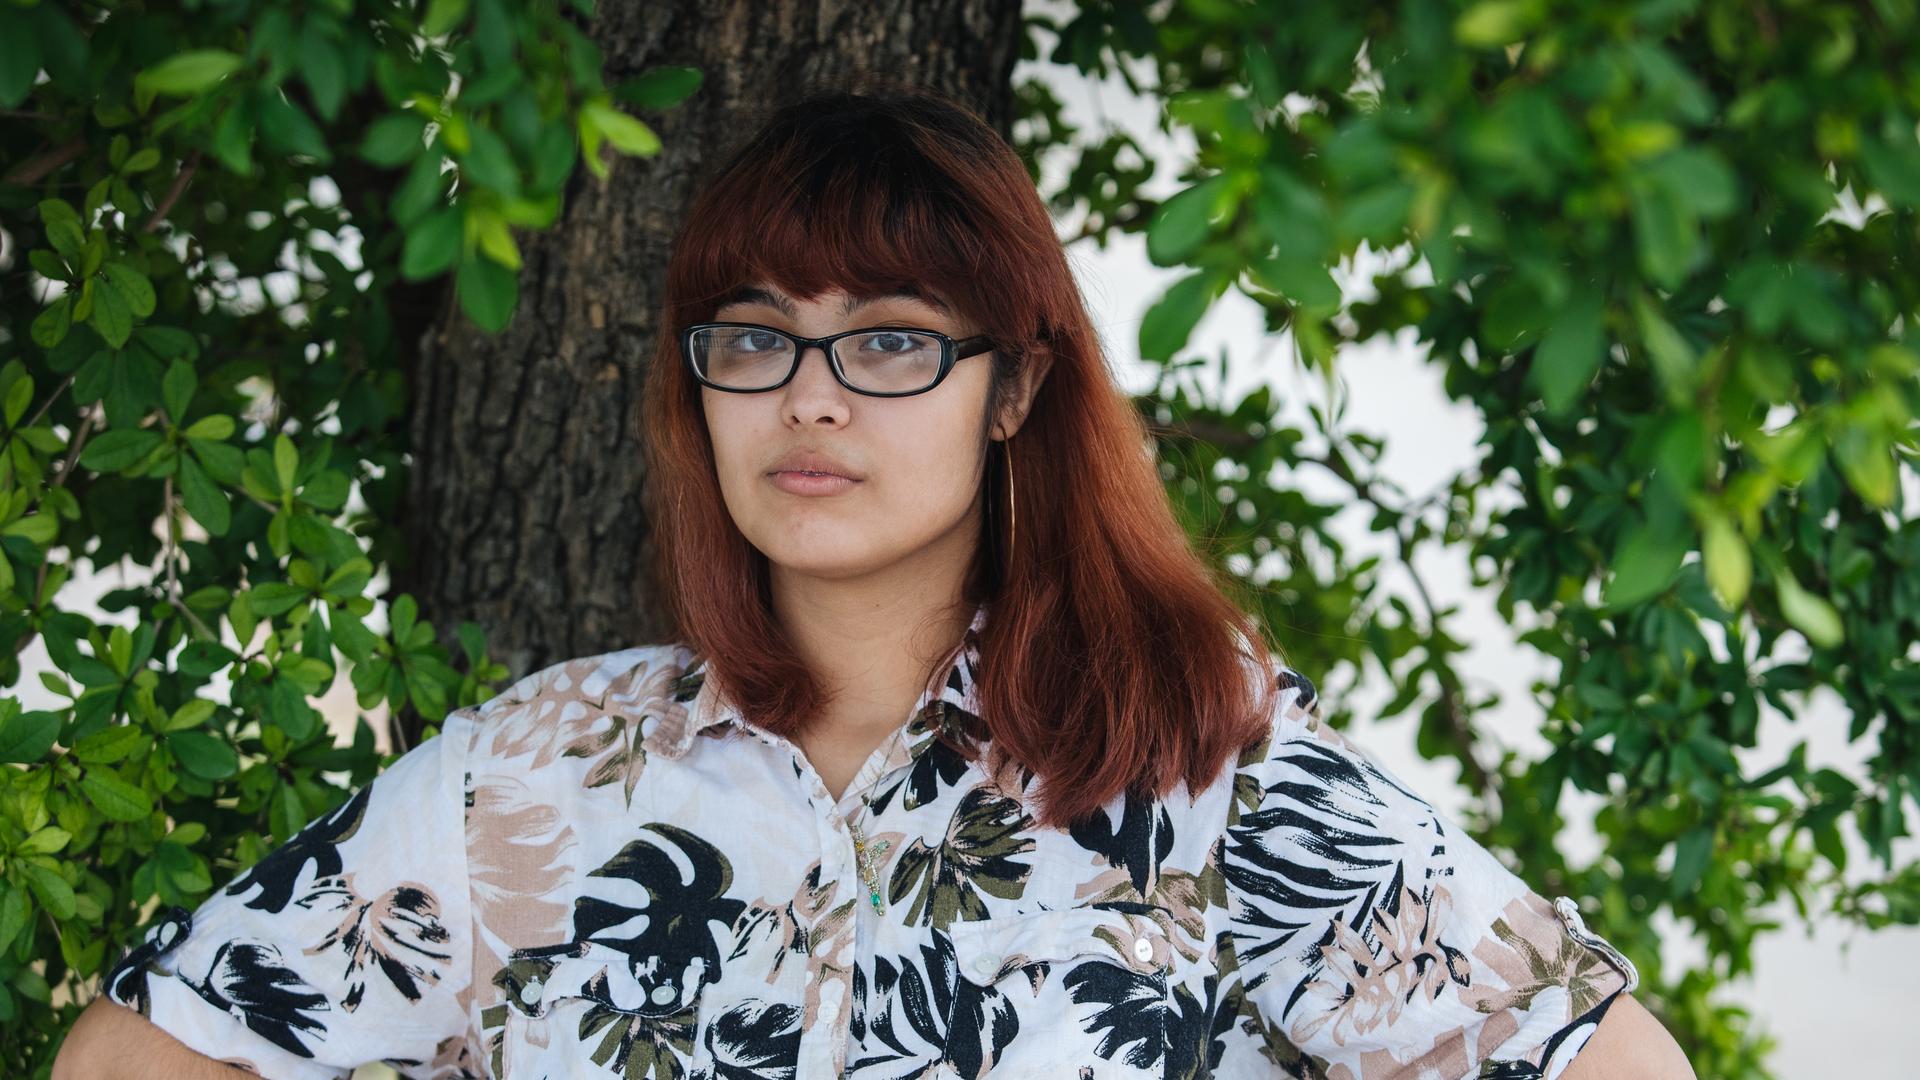 A young person with glasses and wearing a floral shirt poses under a tree outside